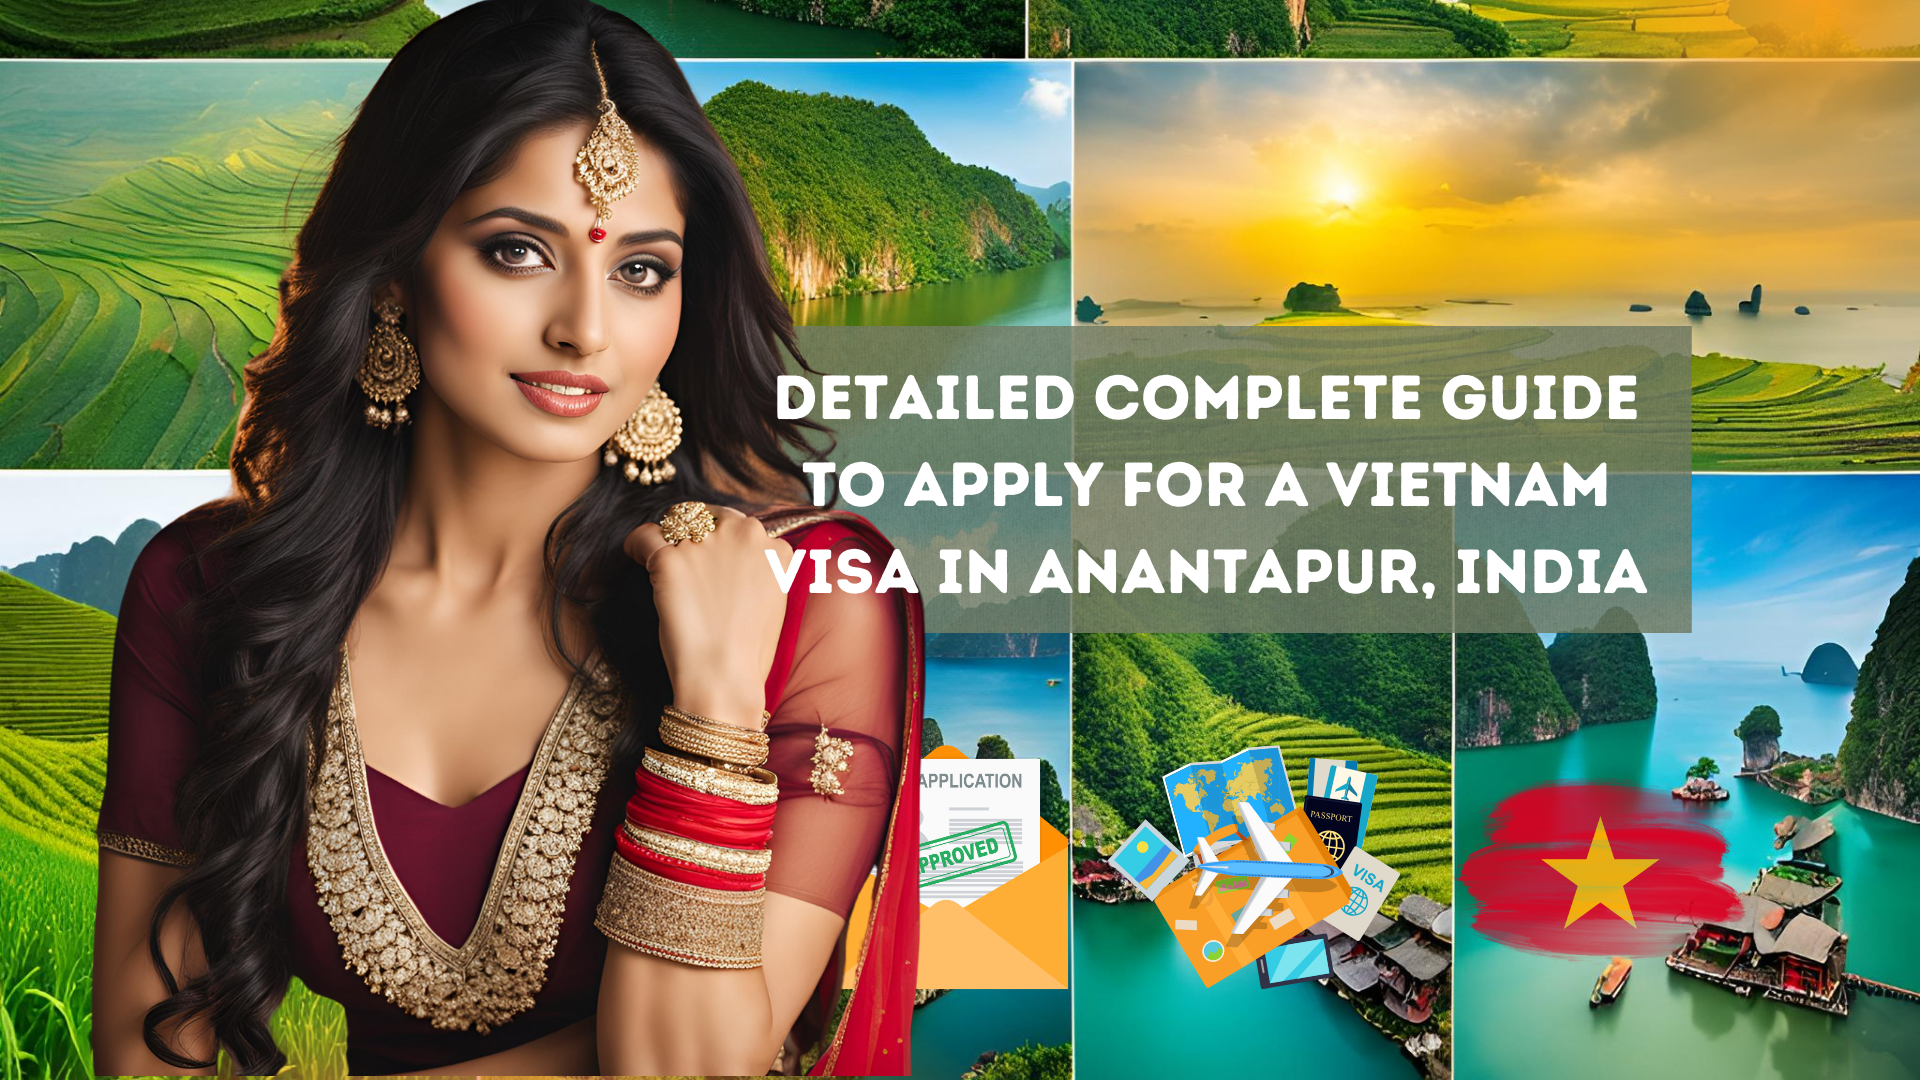 Detailed Complete Guide to Apply for a Vietnam Visa in Anantapur, India